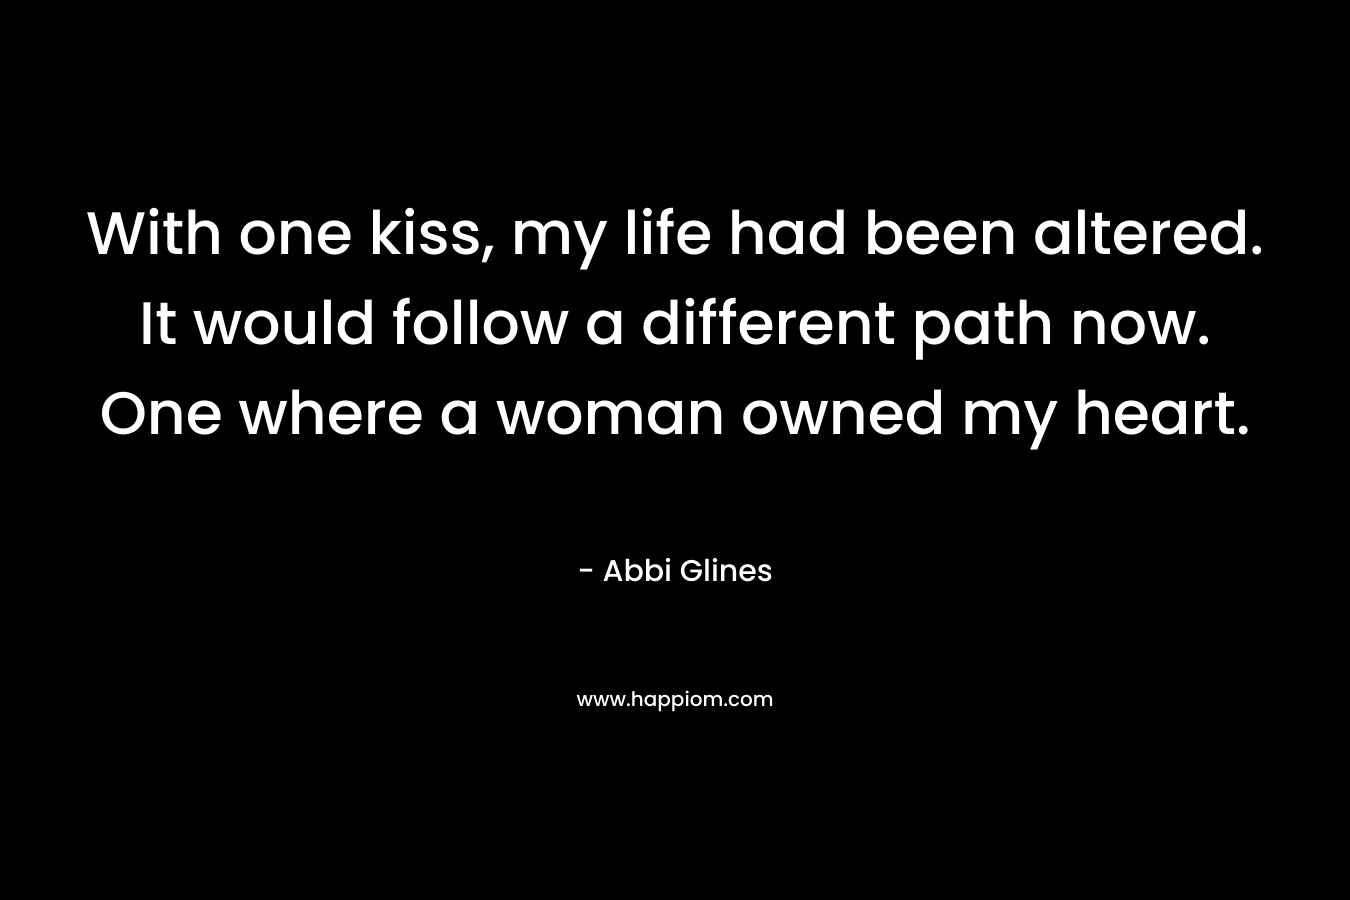 With one kiss, my life had been altered. It would follow a different path now. One where a woman owned my heart. – Abbi Glines